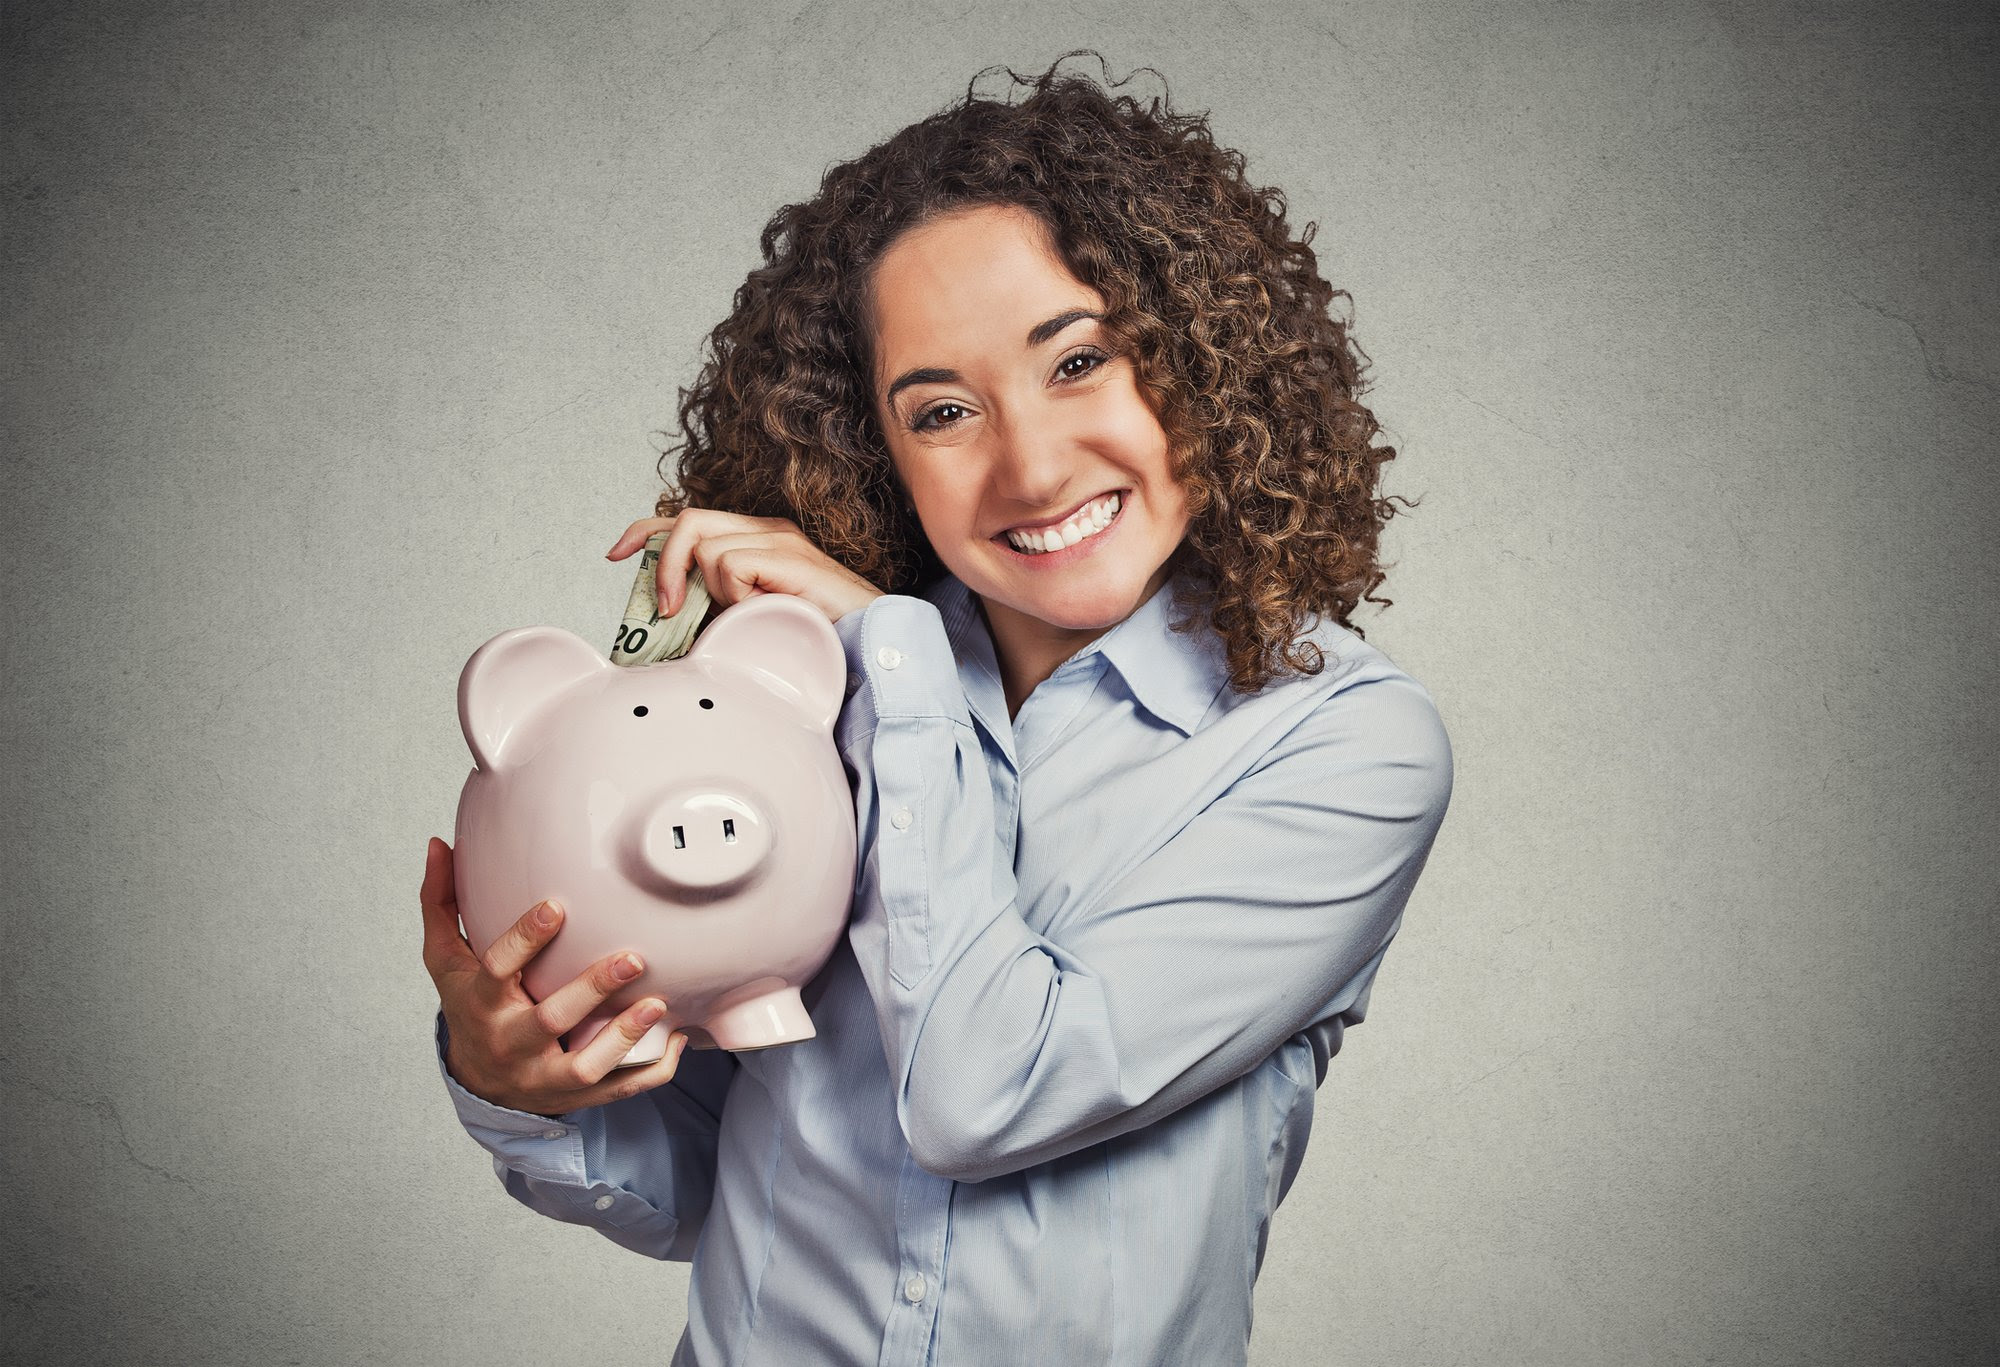 A woman holding a piggy bank and smiling.